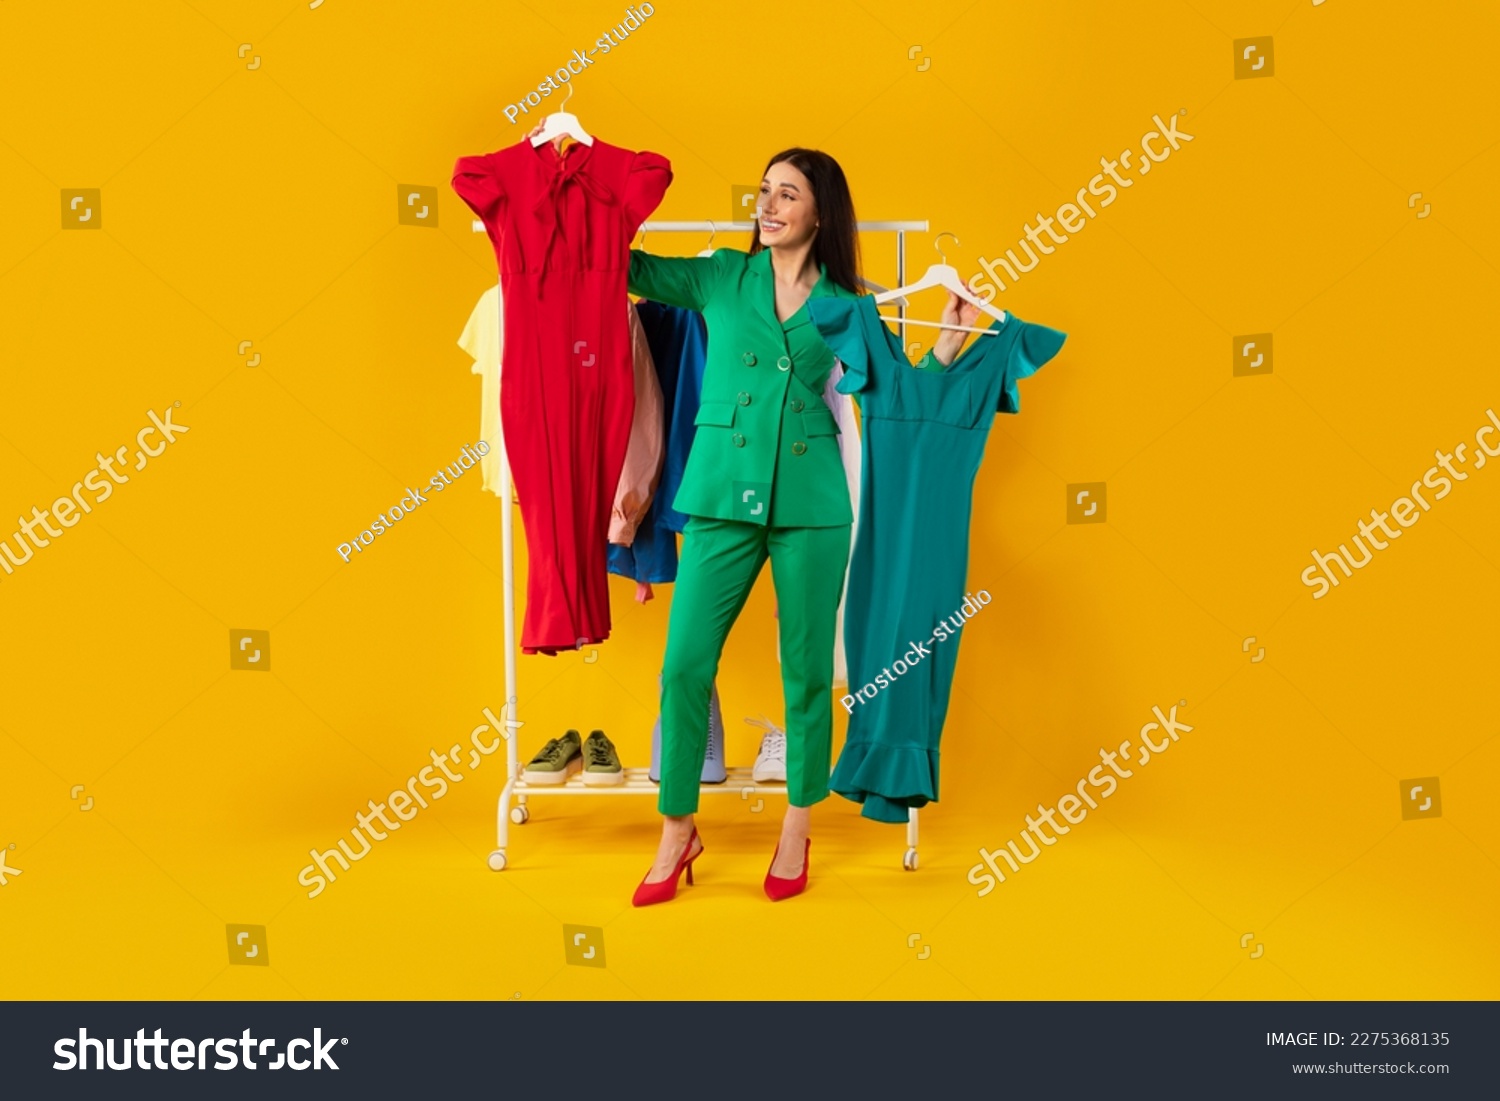 Shopaholic. Happy elegant woman choosing dresses holding two hangers, standing near clothing rail with trendy clothes over yellow background. Female fashion choice #2275368135